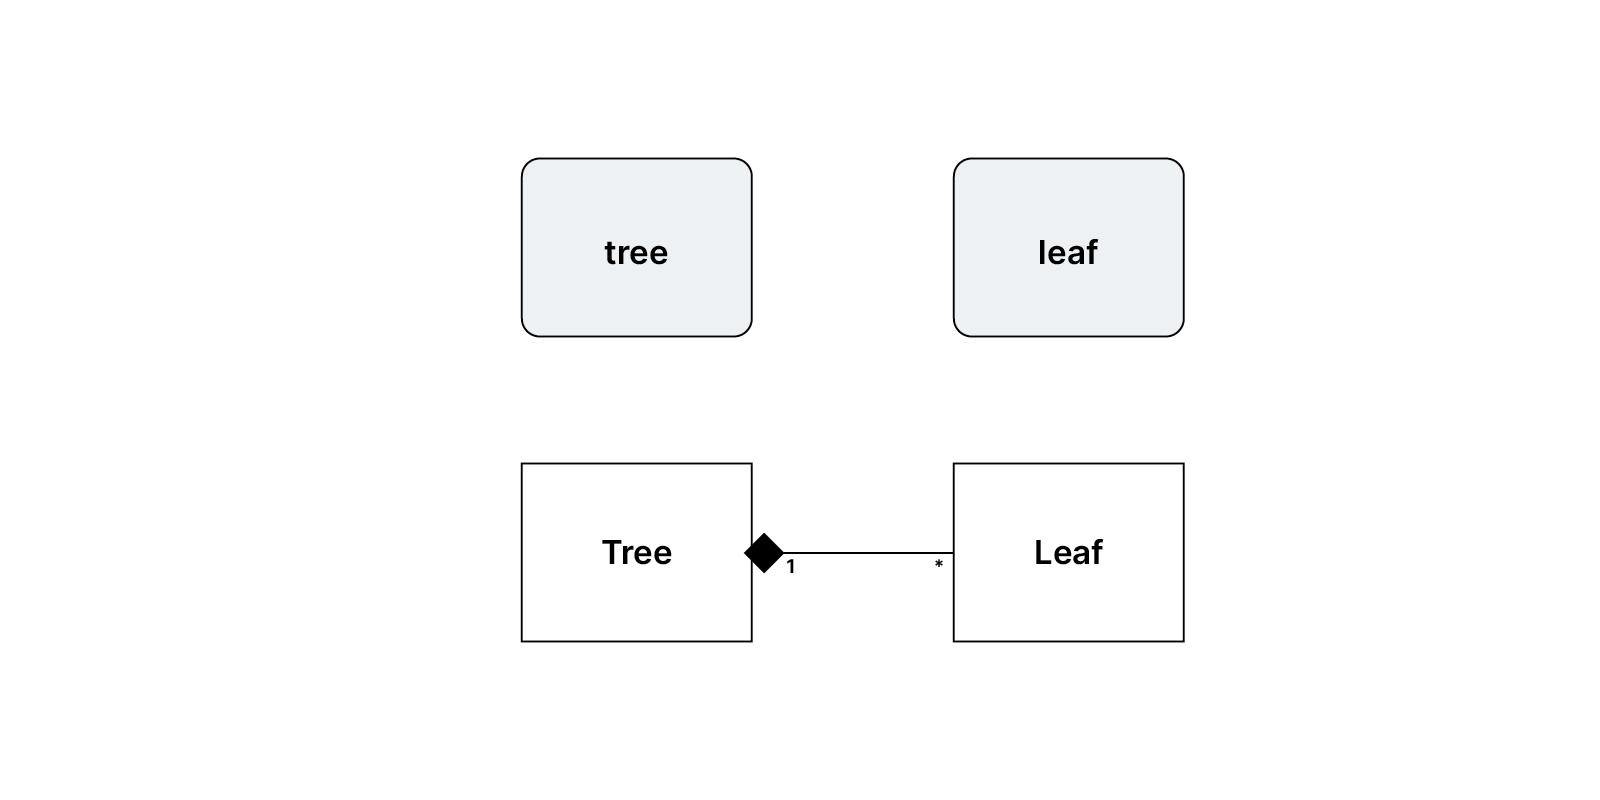 Class diagram that shows the relationship between a tree and its leaves by composition relationship, in this case it is representing that a tree contains several leaves.